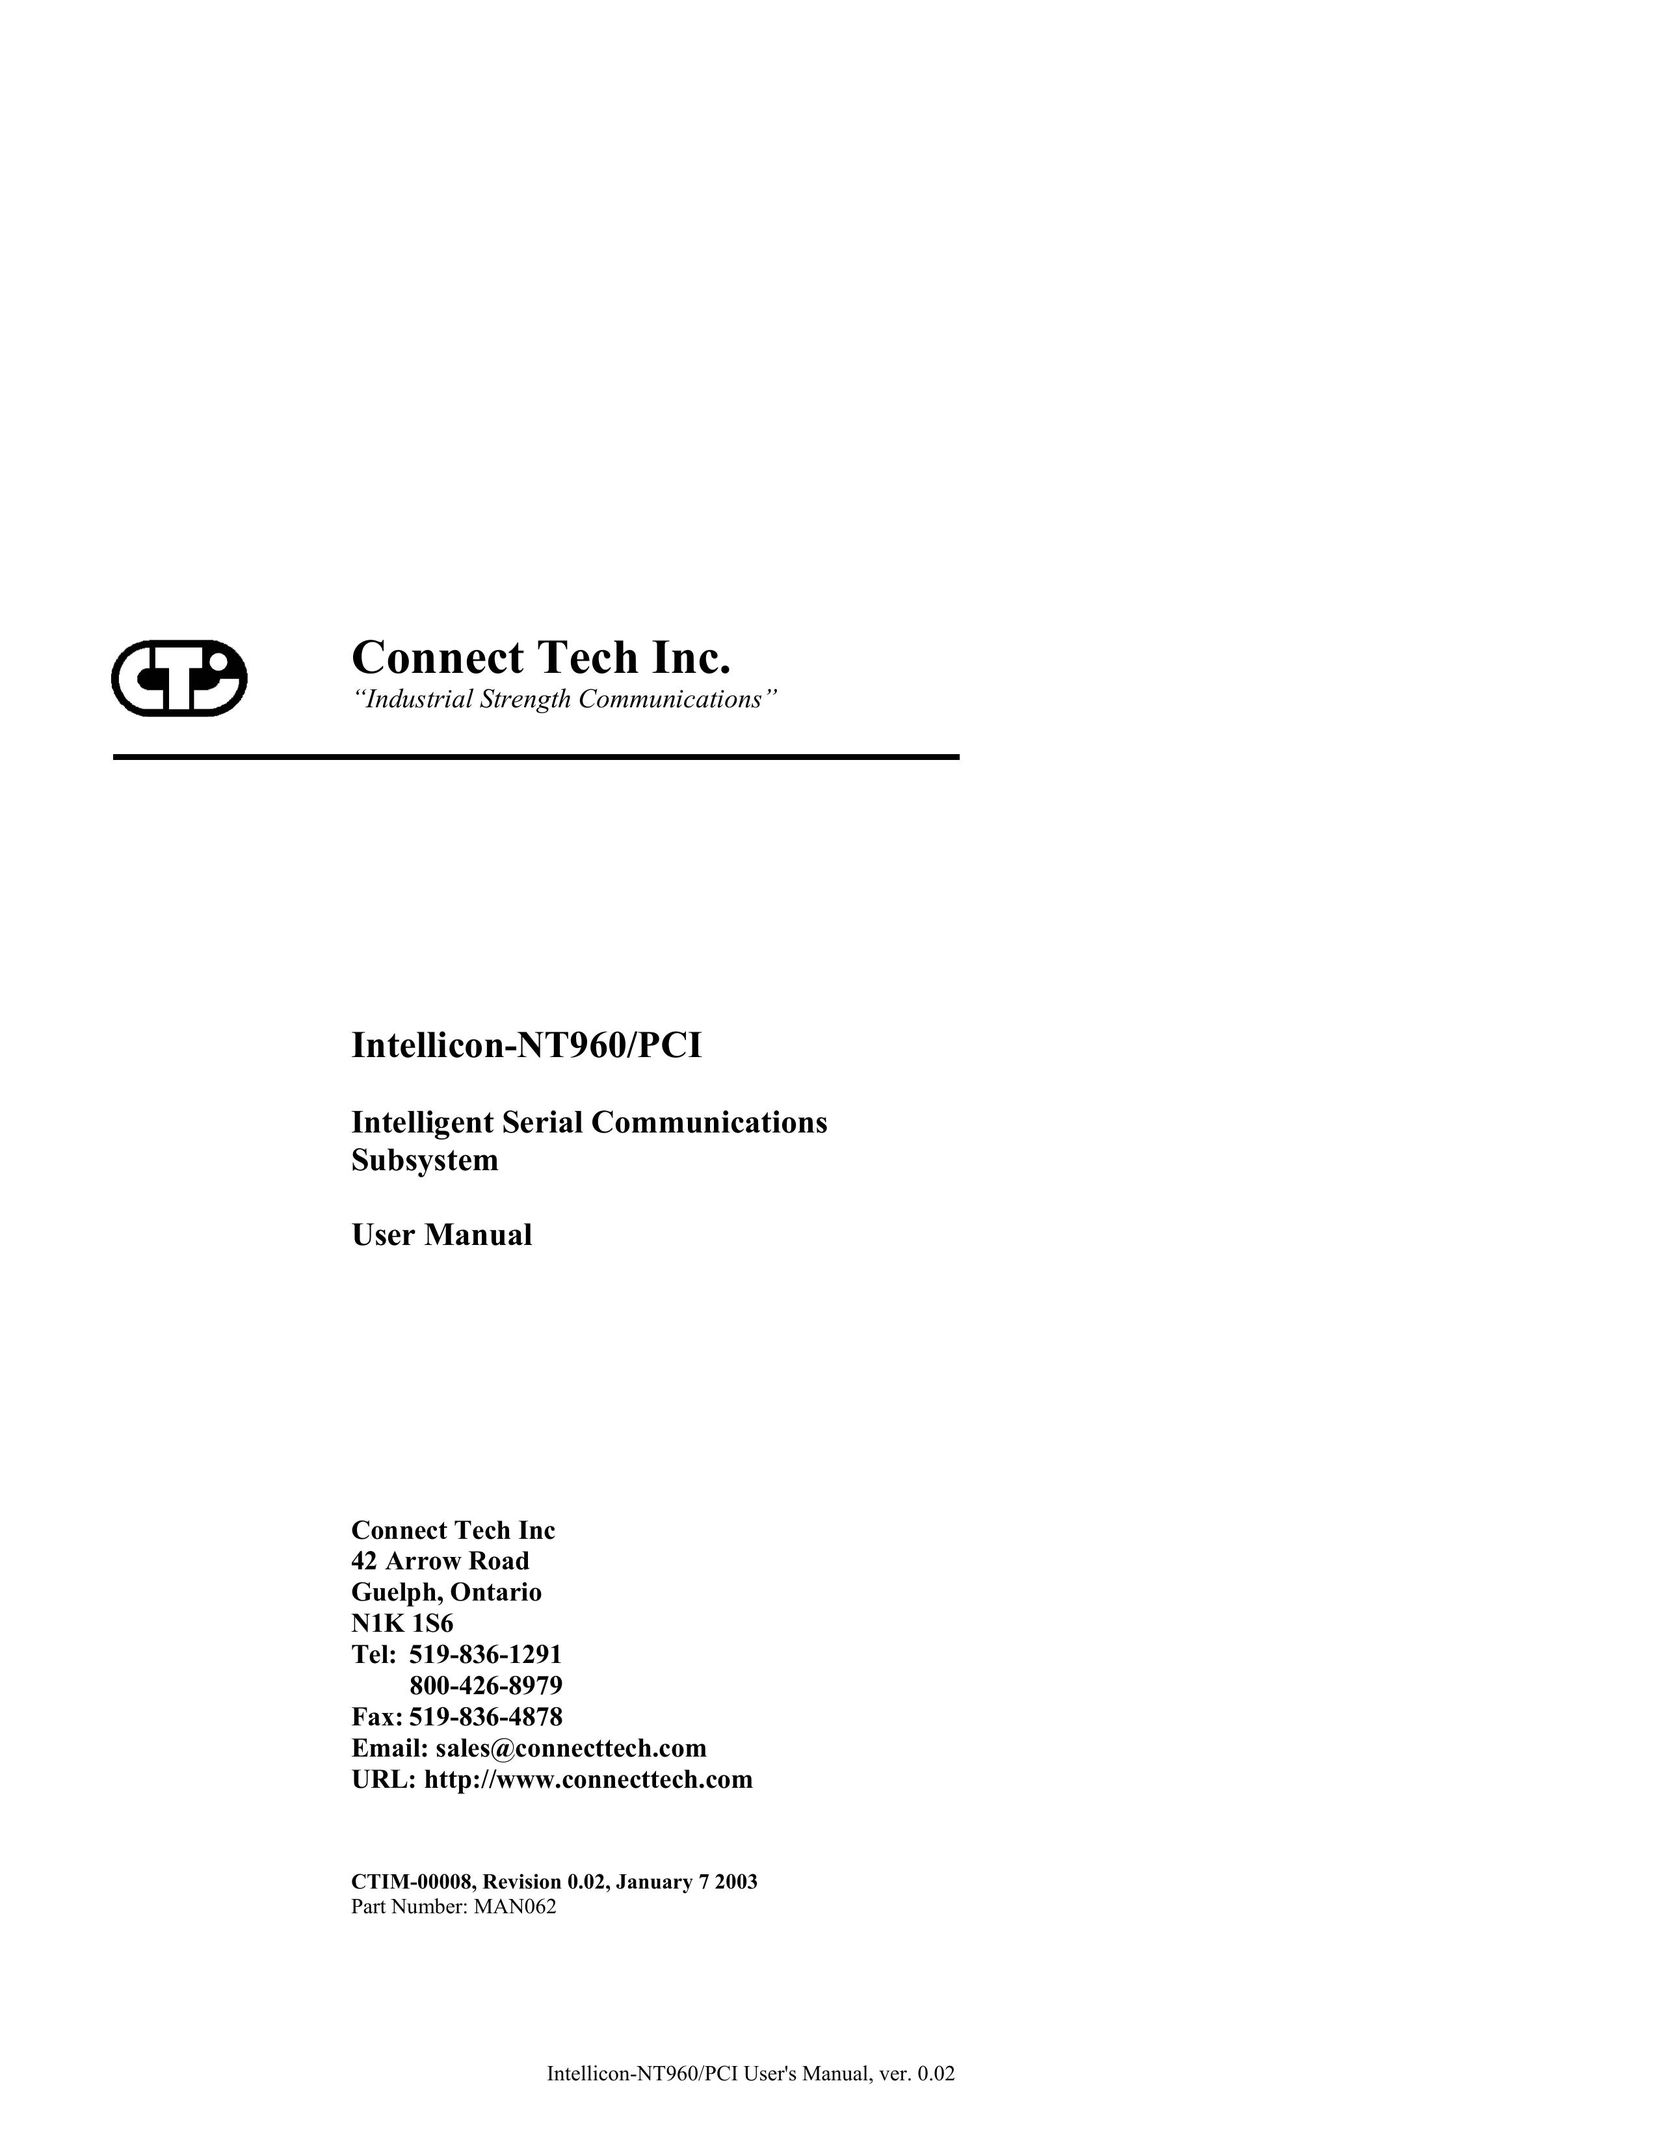 Connect Tech NT960/PCI Switch User Manual